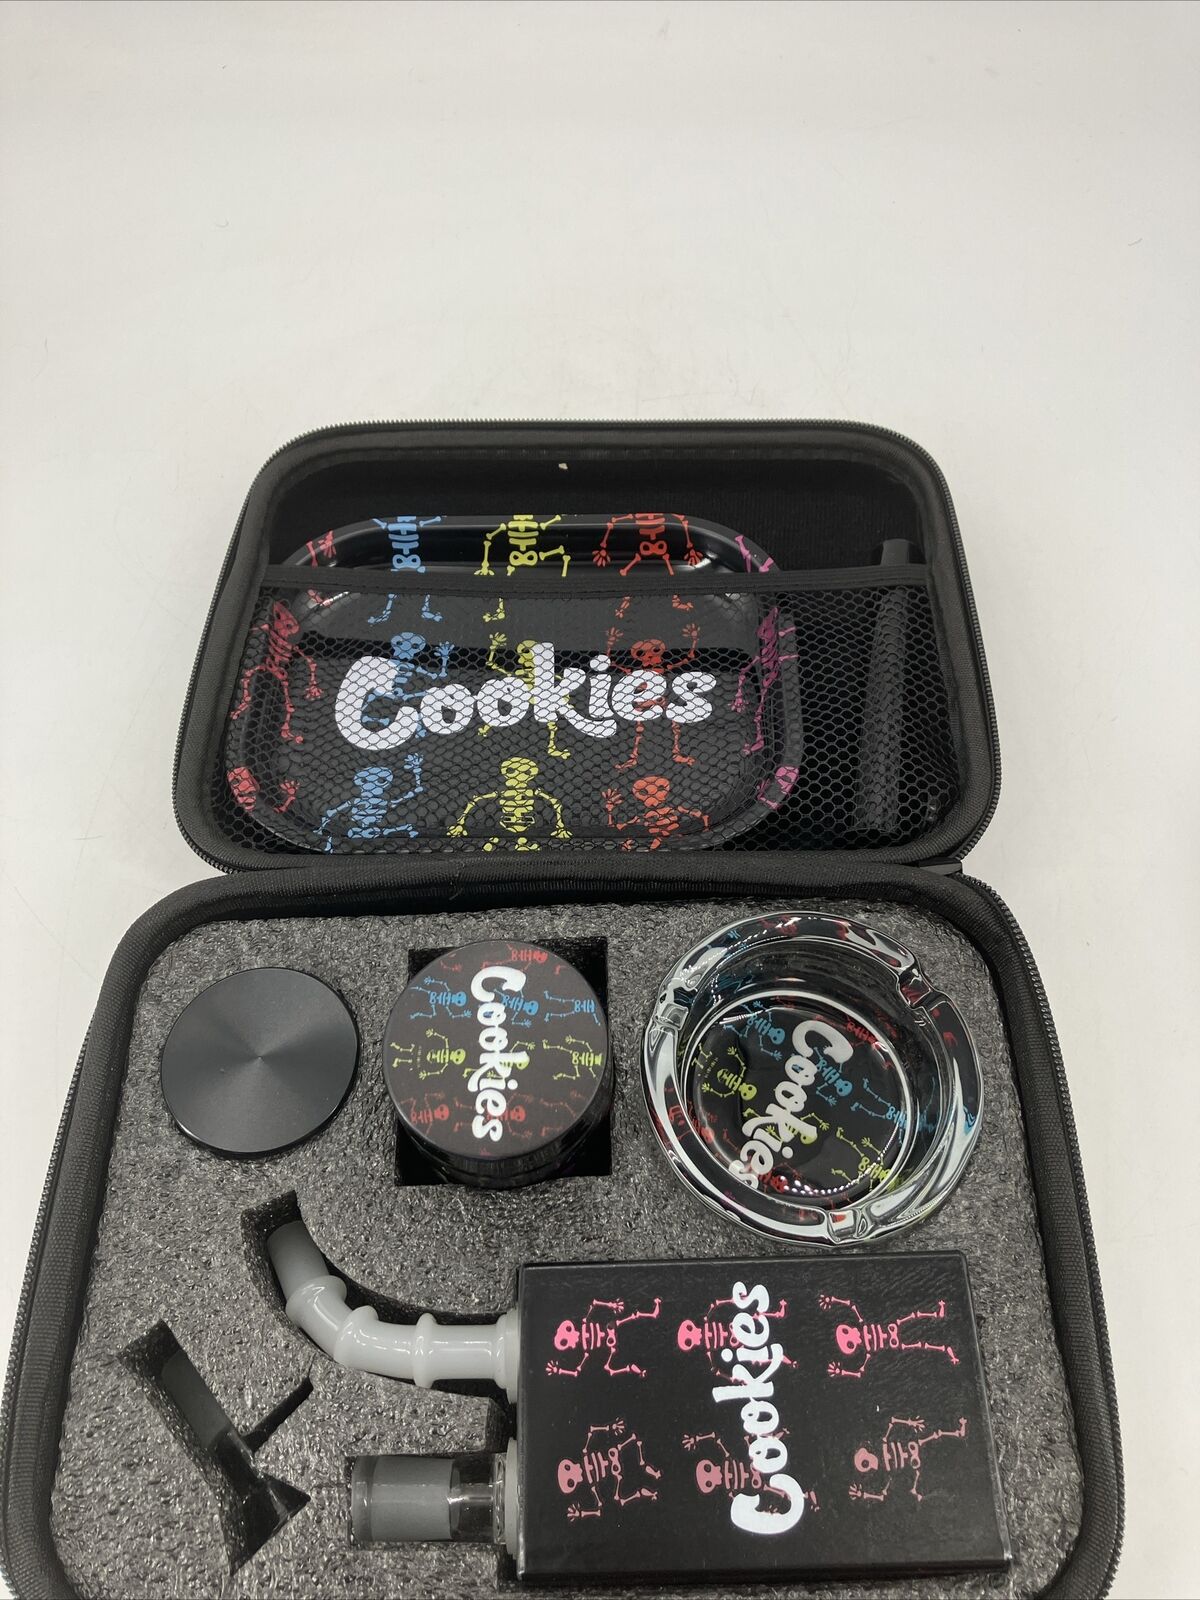 COOKIES SMOKING KIT 6 Piece set Tray, grinder,scale,storage can, roller, & cones